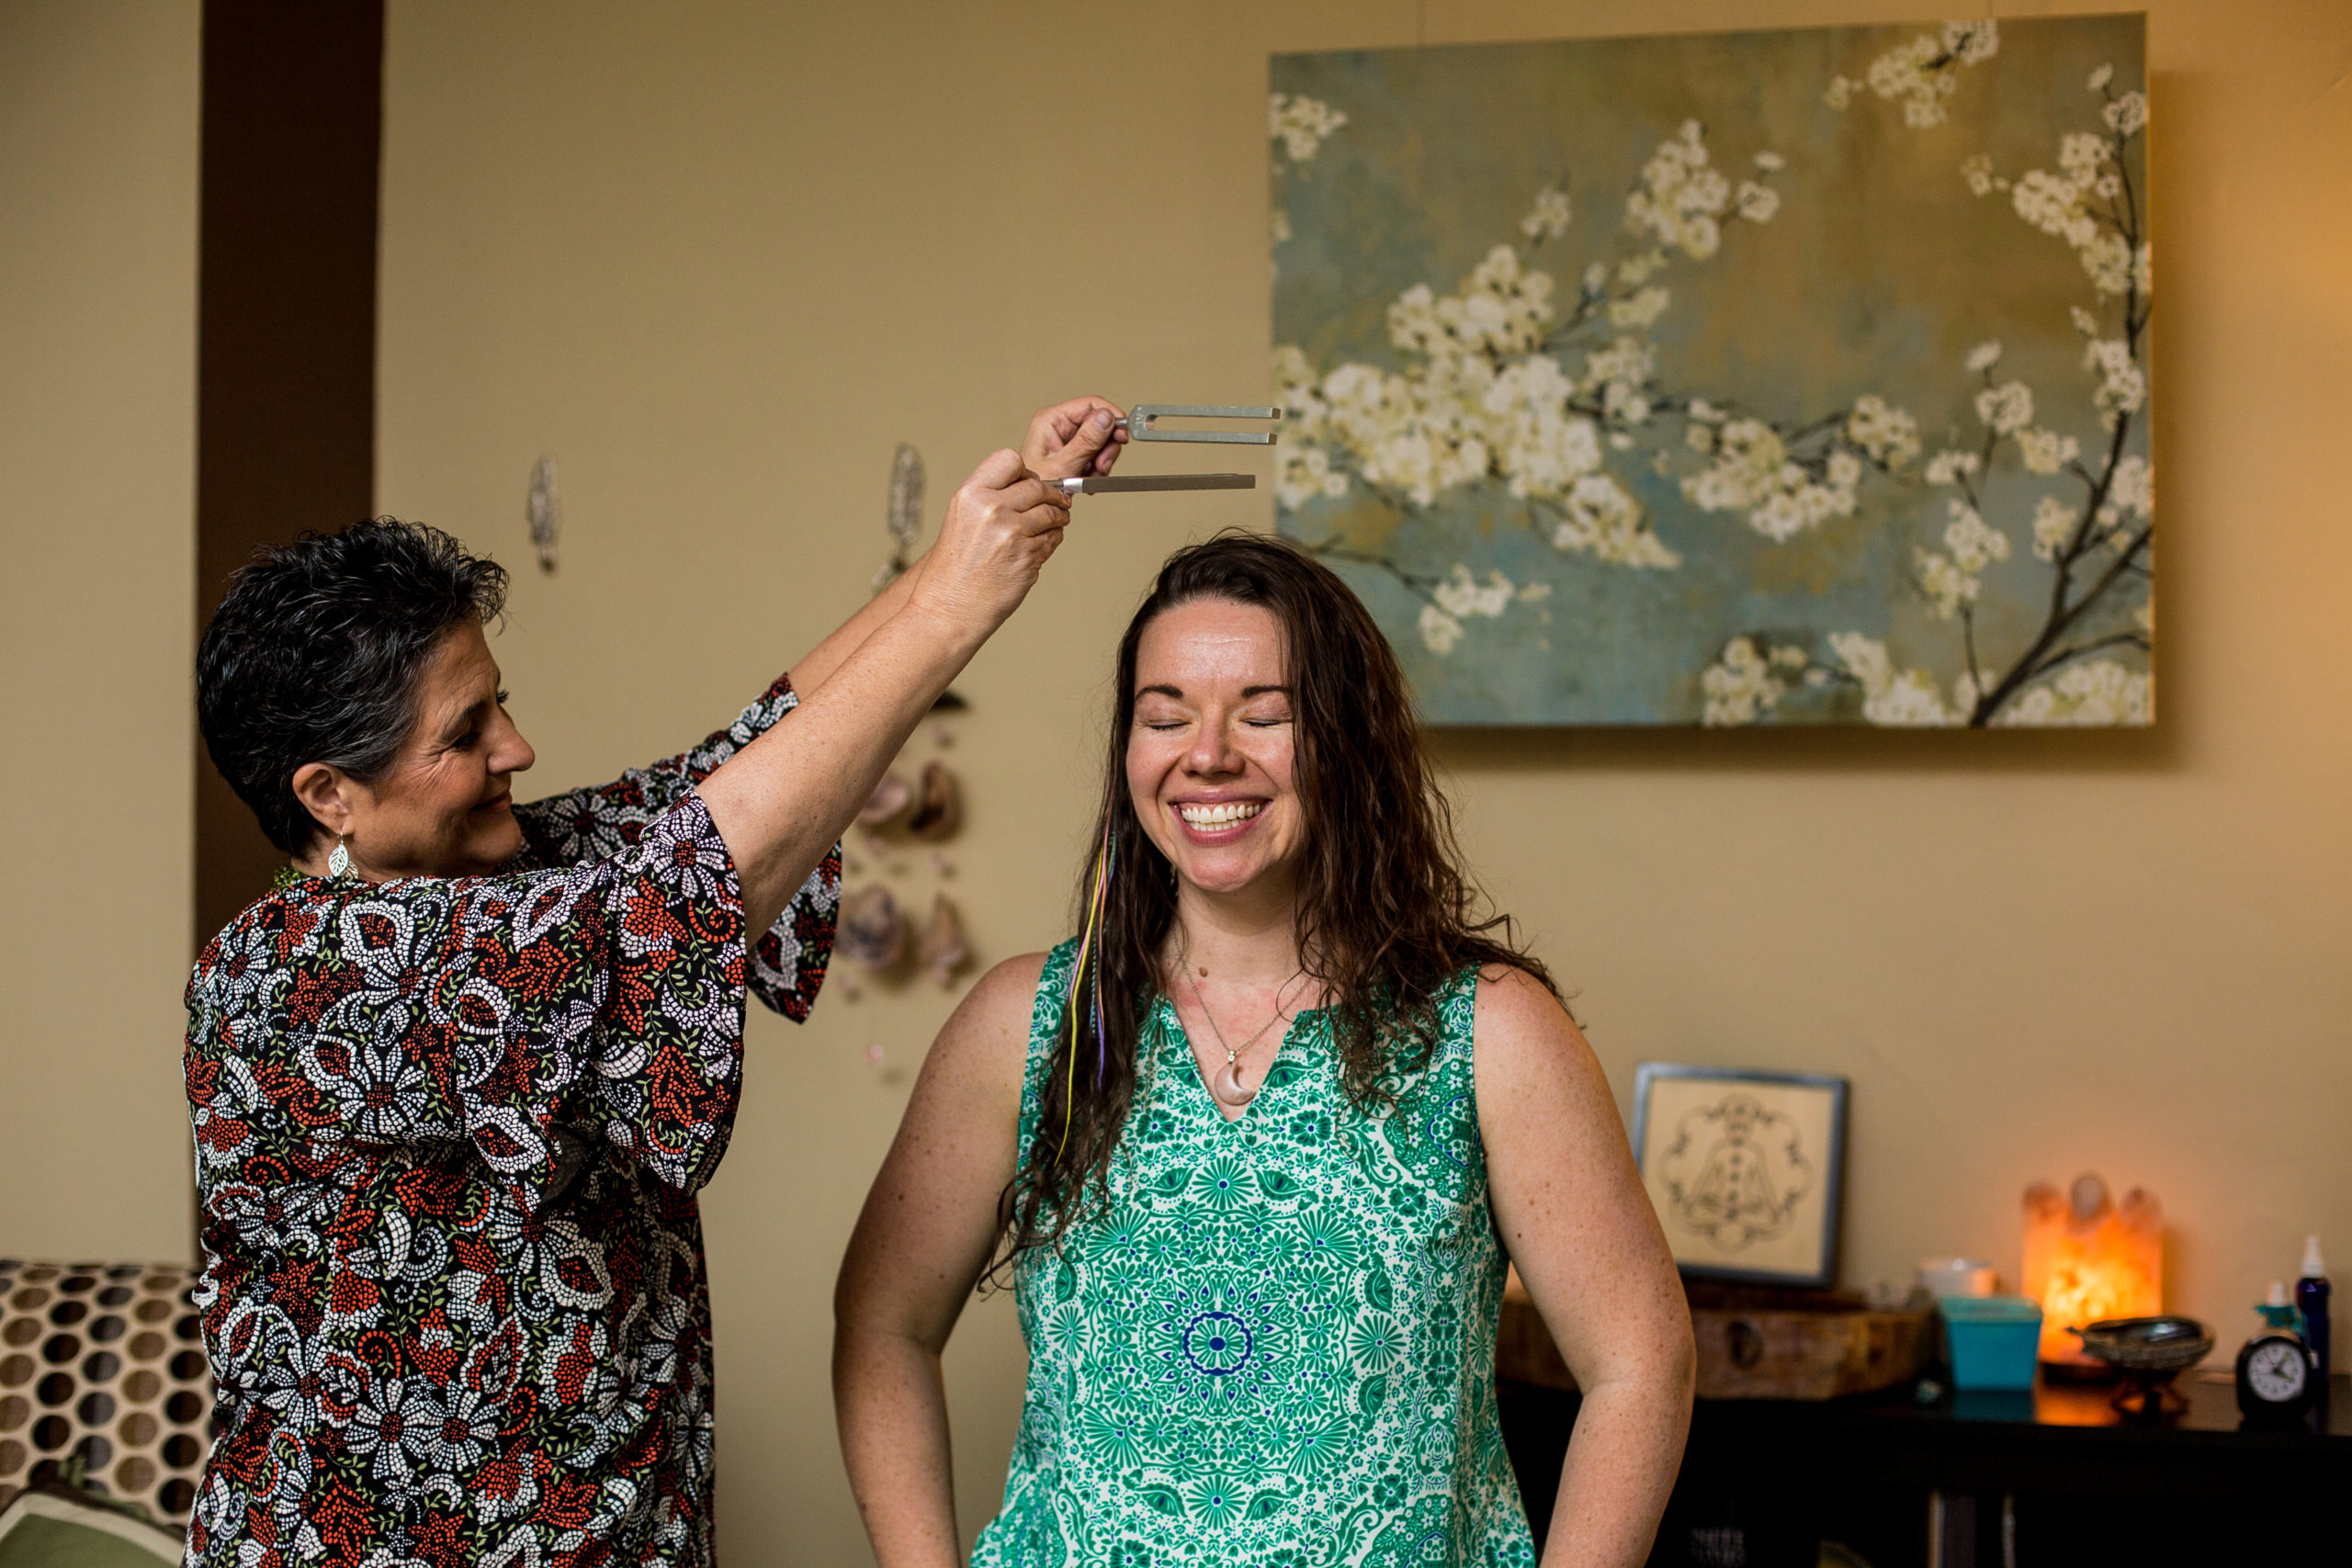 Woman performs energy healing with tuning forks above another woman's head as she smiles